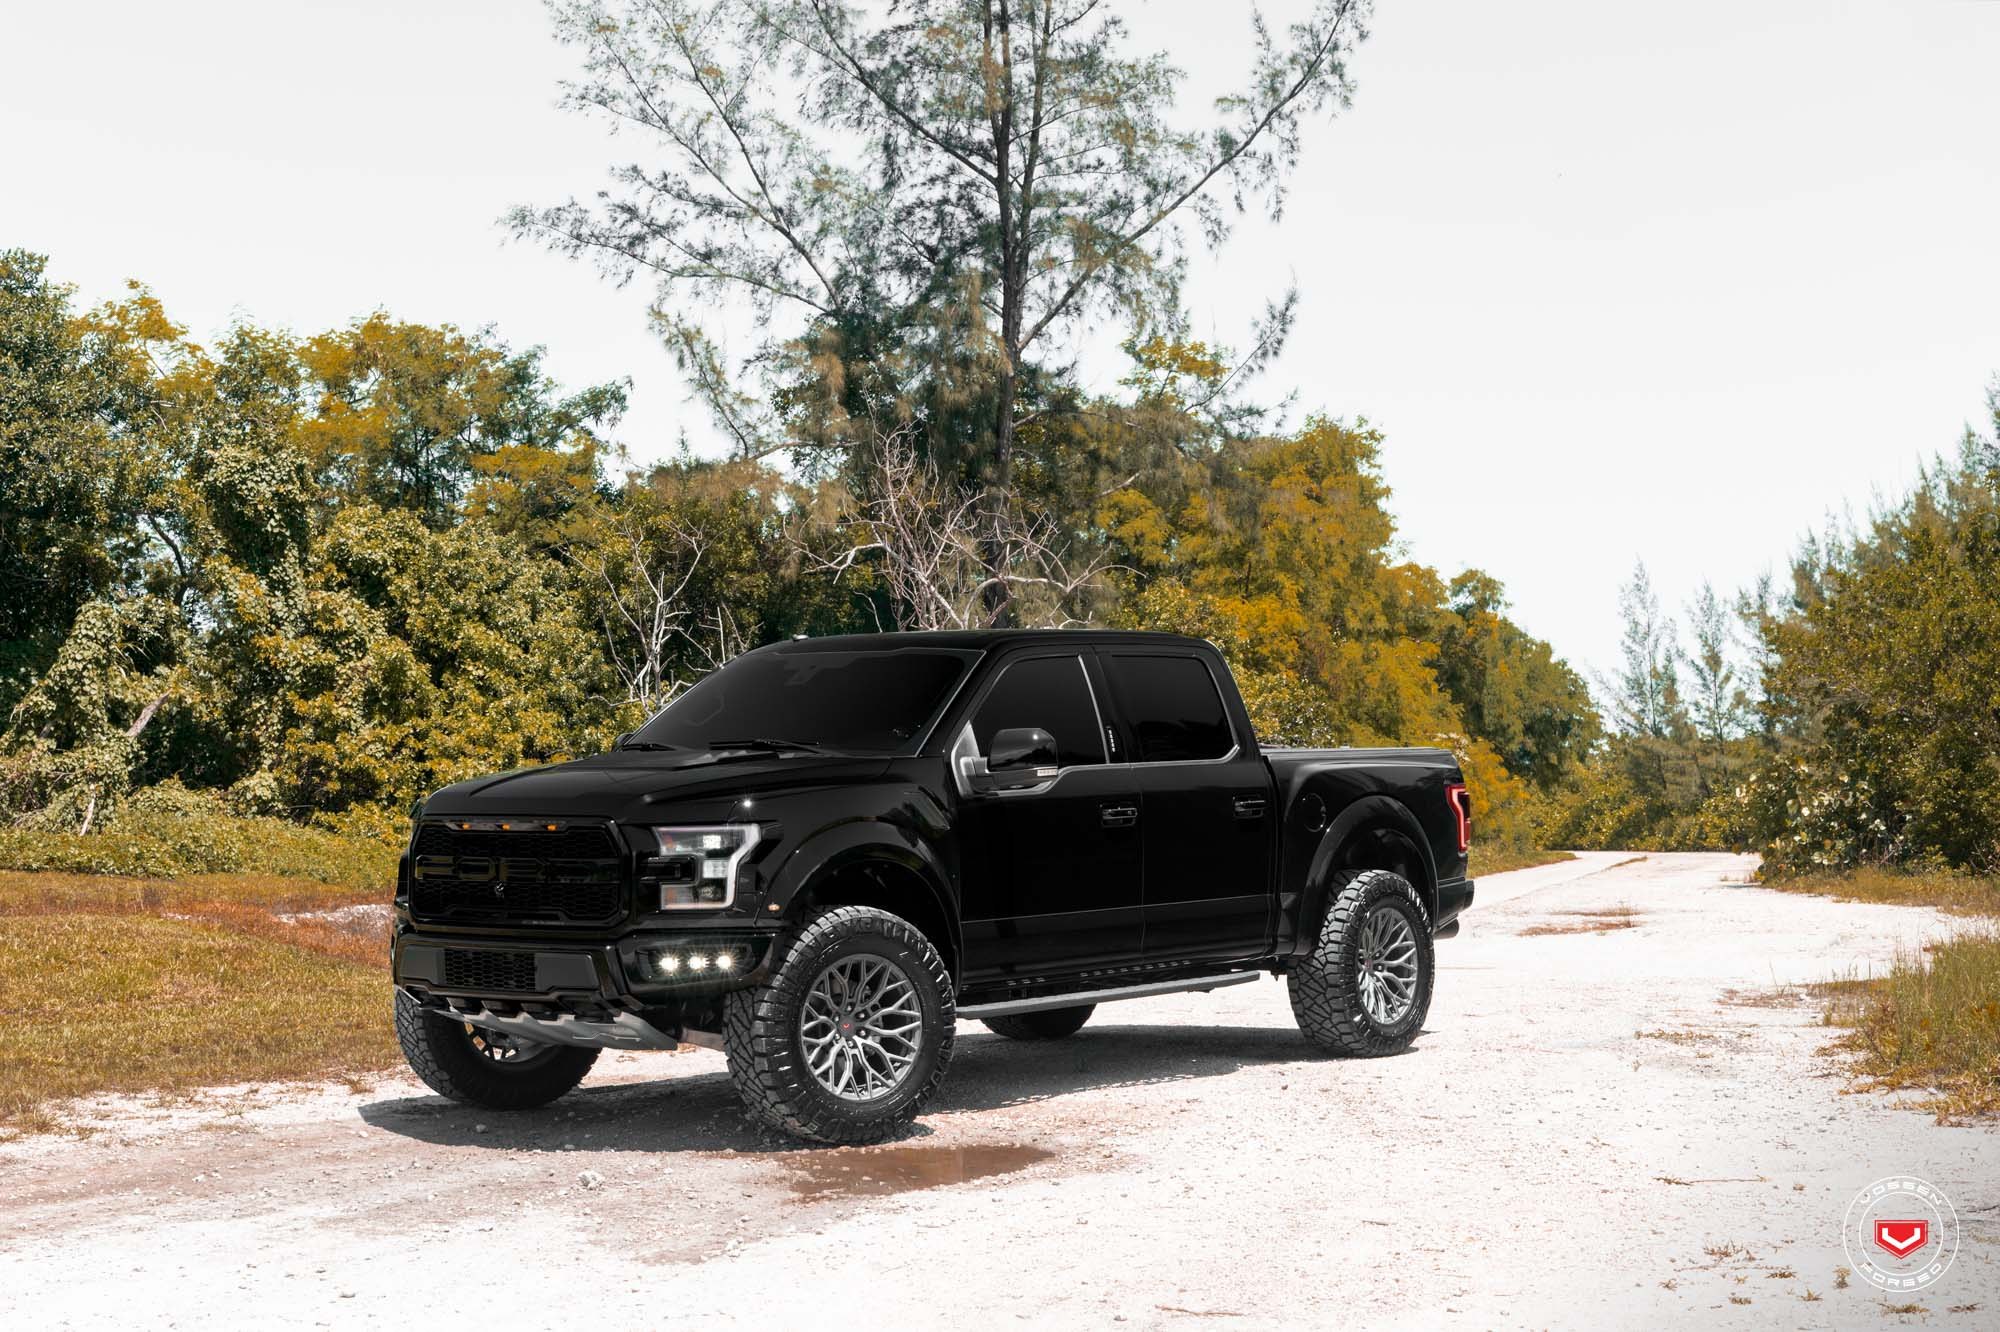 Black Lifted Ford F-150 with Custom Projector Headlights - Photo by Vossen